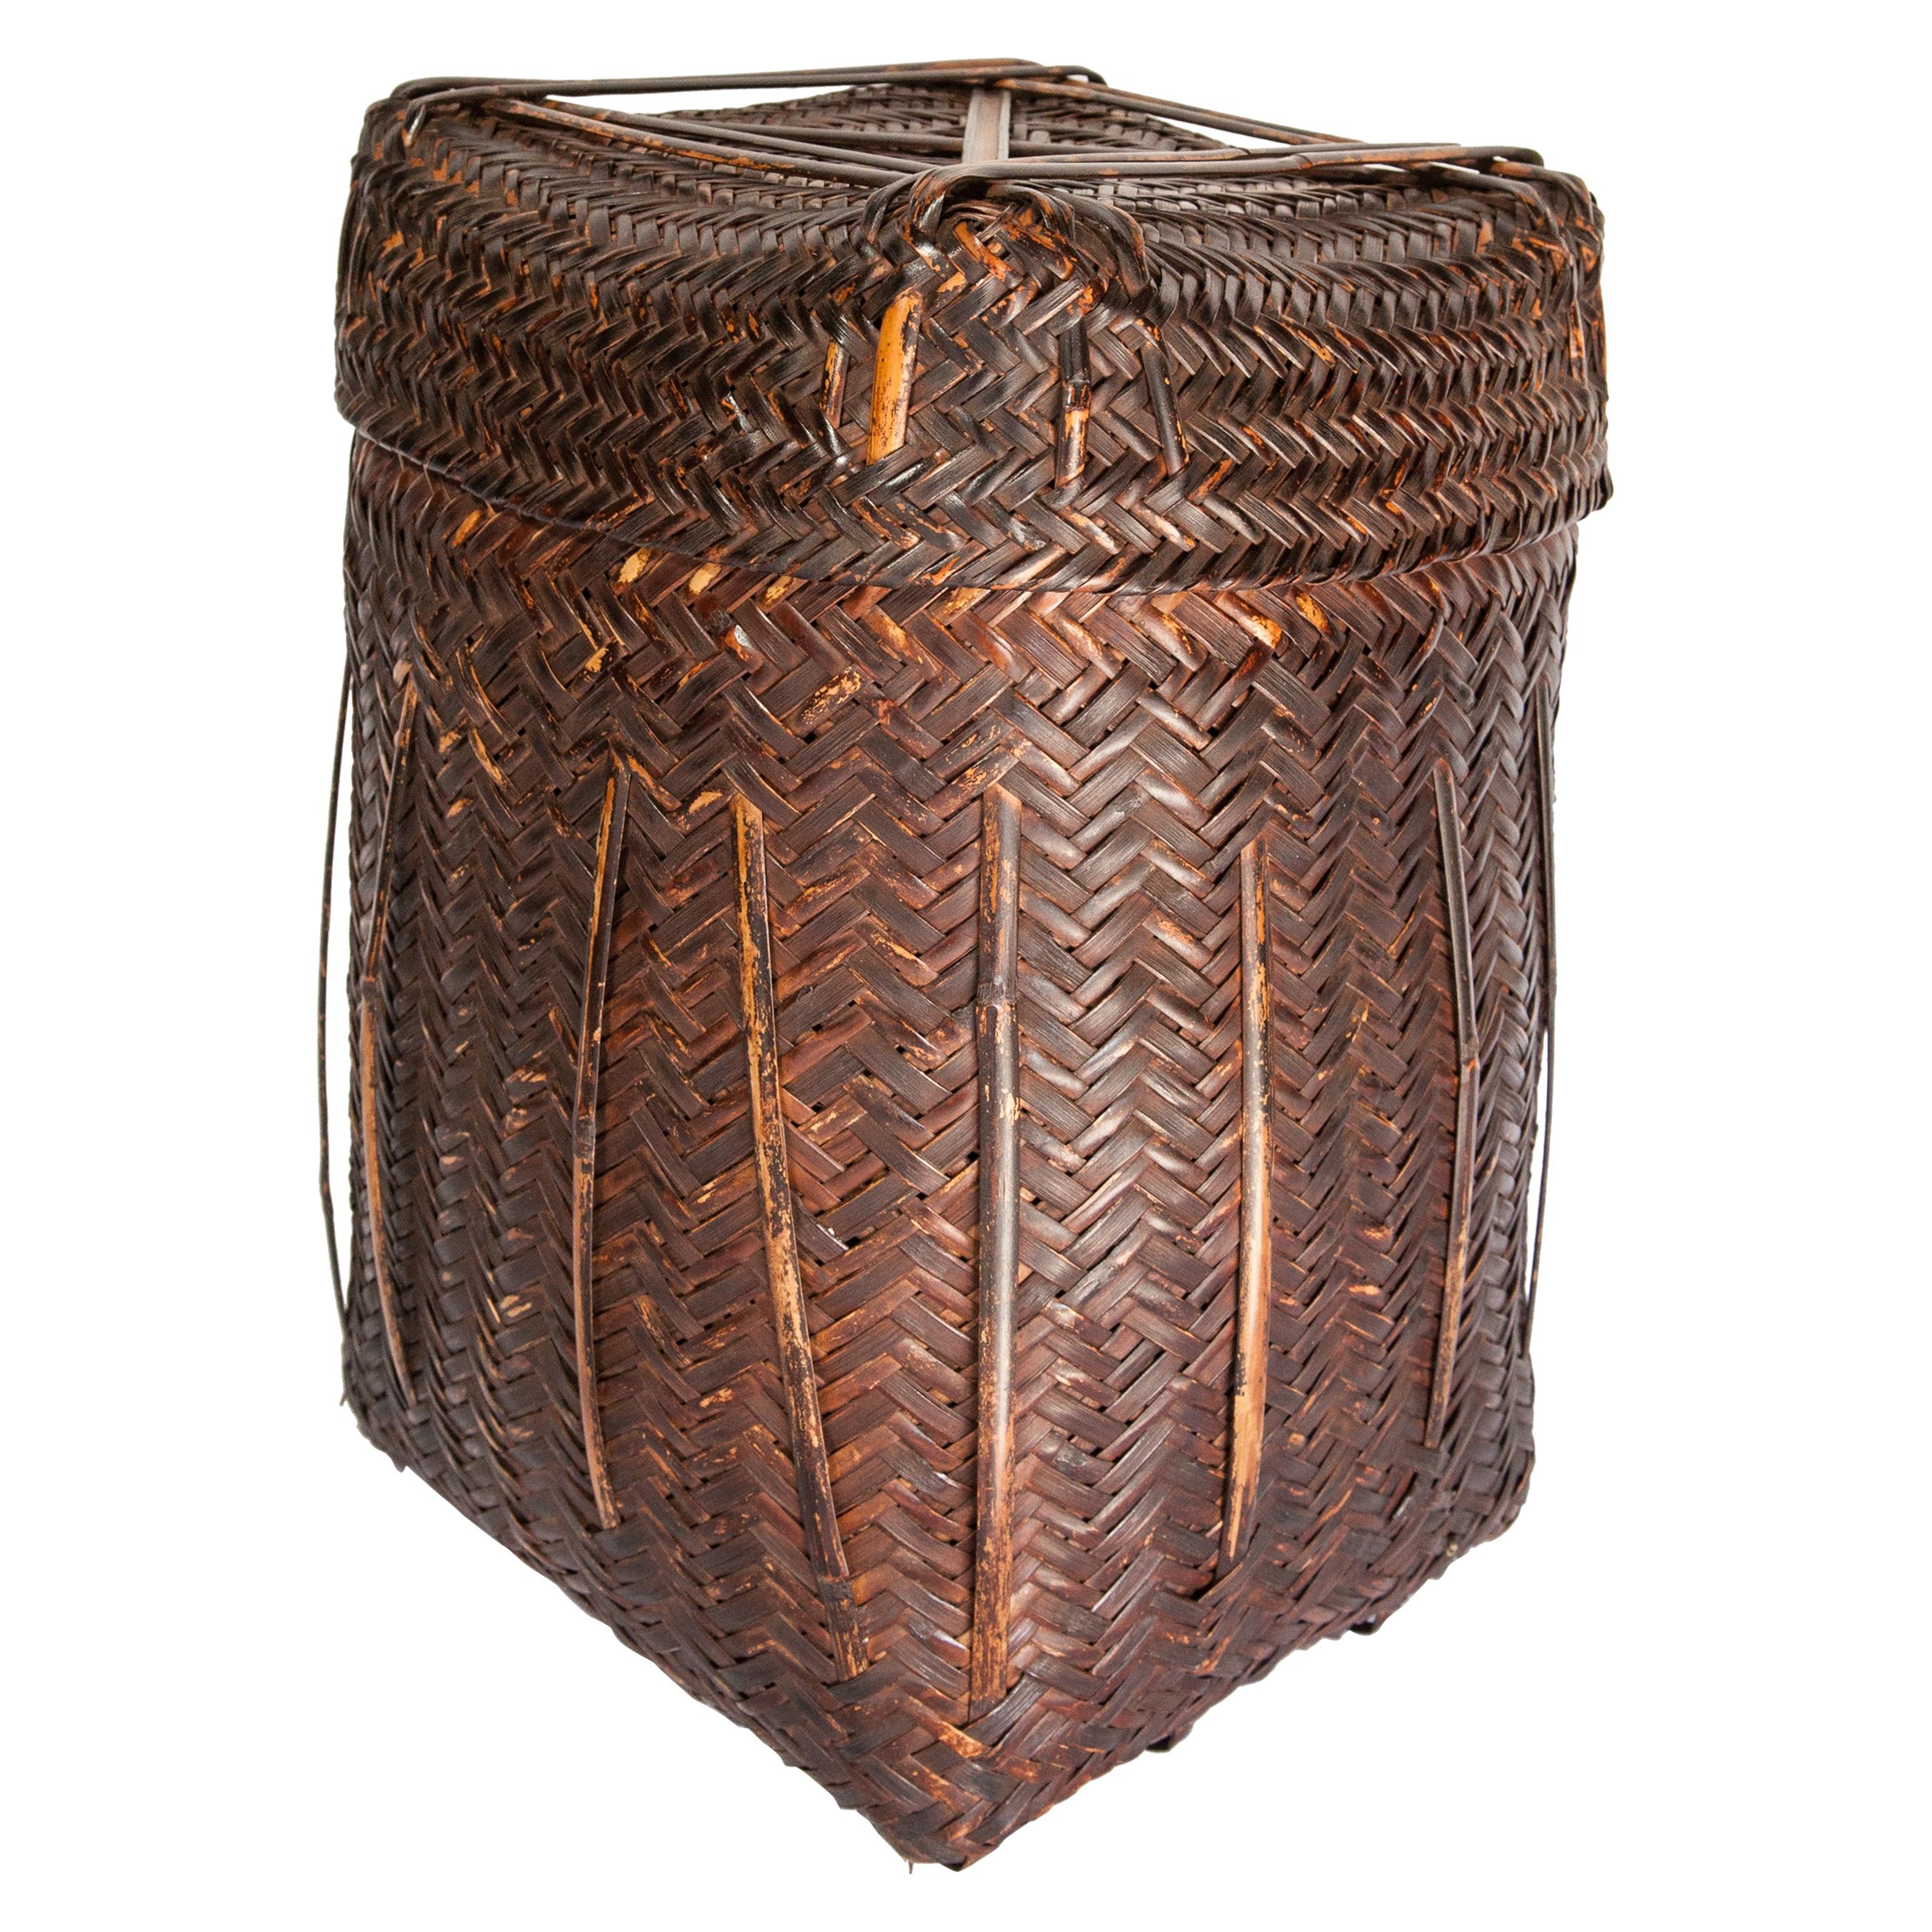 Tribal Storage Basket Box with Lid from the Magar of Nepal, Mid-20th Century